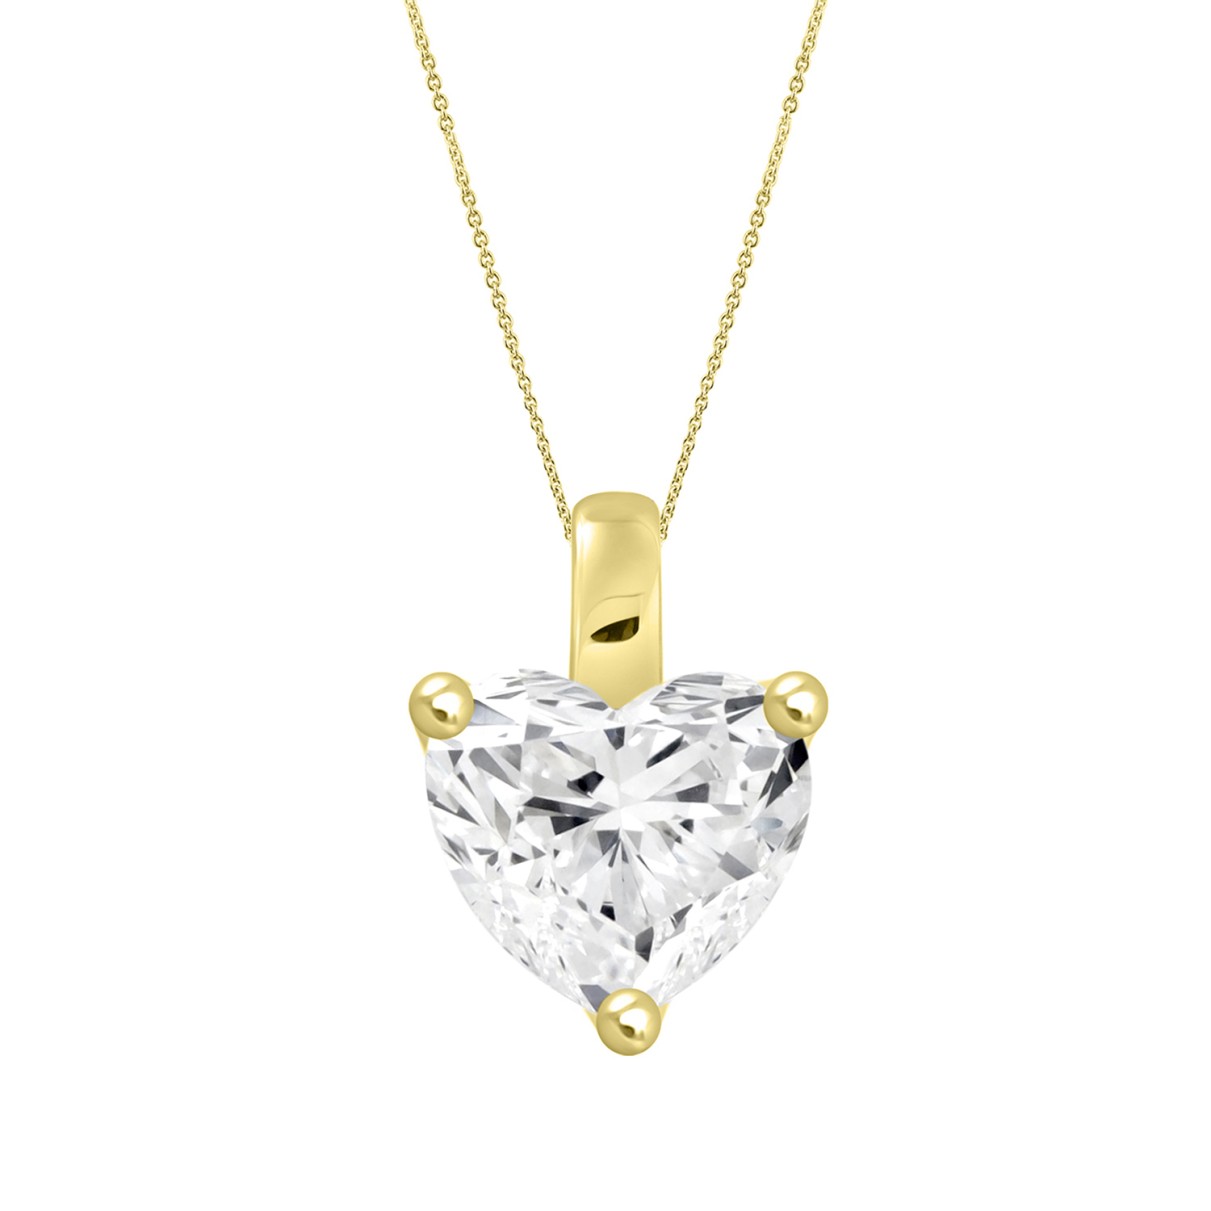 LADIES SOLITAIRE PENDANT WITH CHAIN 1 1/2CT HEART DIAMOND 14K YELLOW GOLD